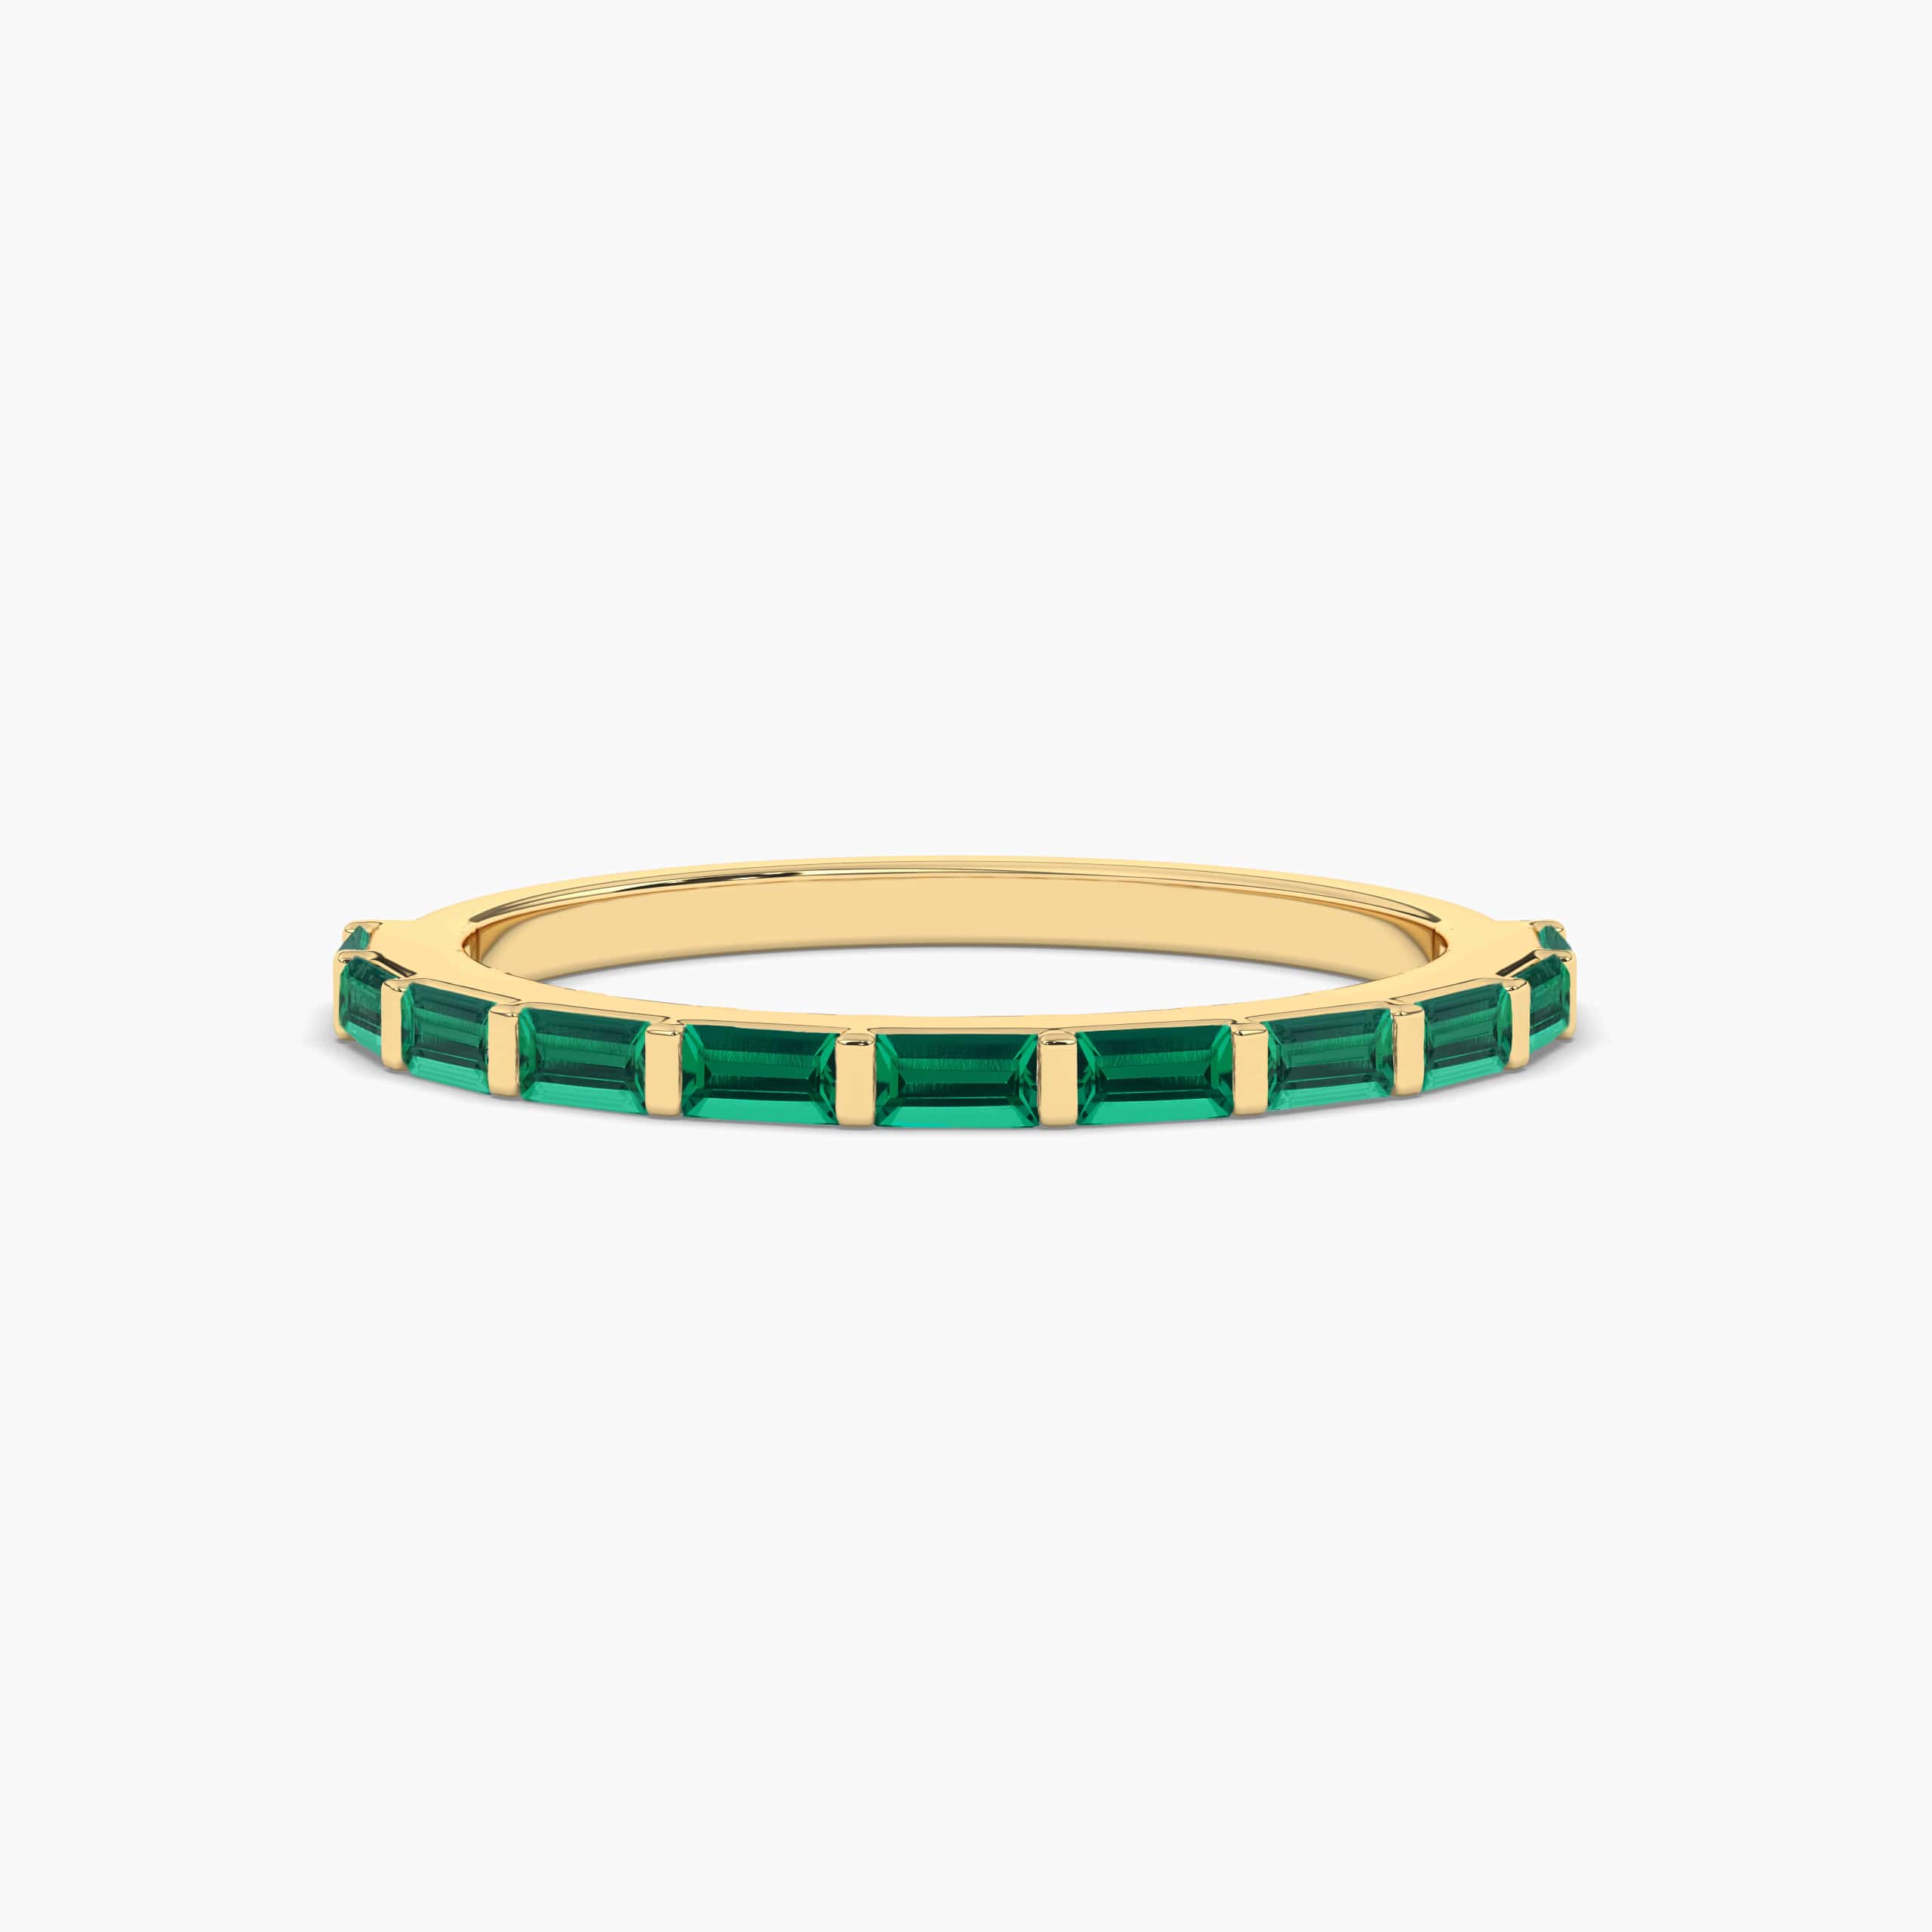 BAGUETTE-CUT EMERALD RING IN YELLOW GOLD 